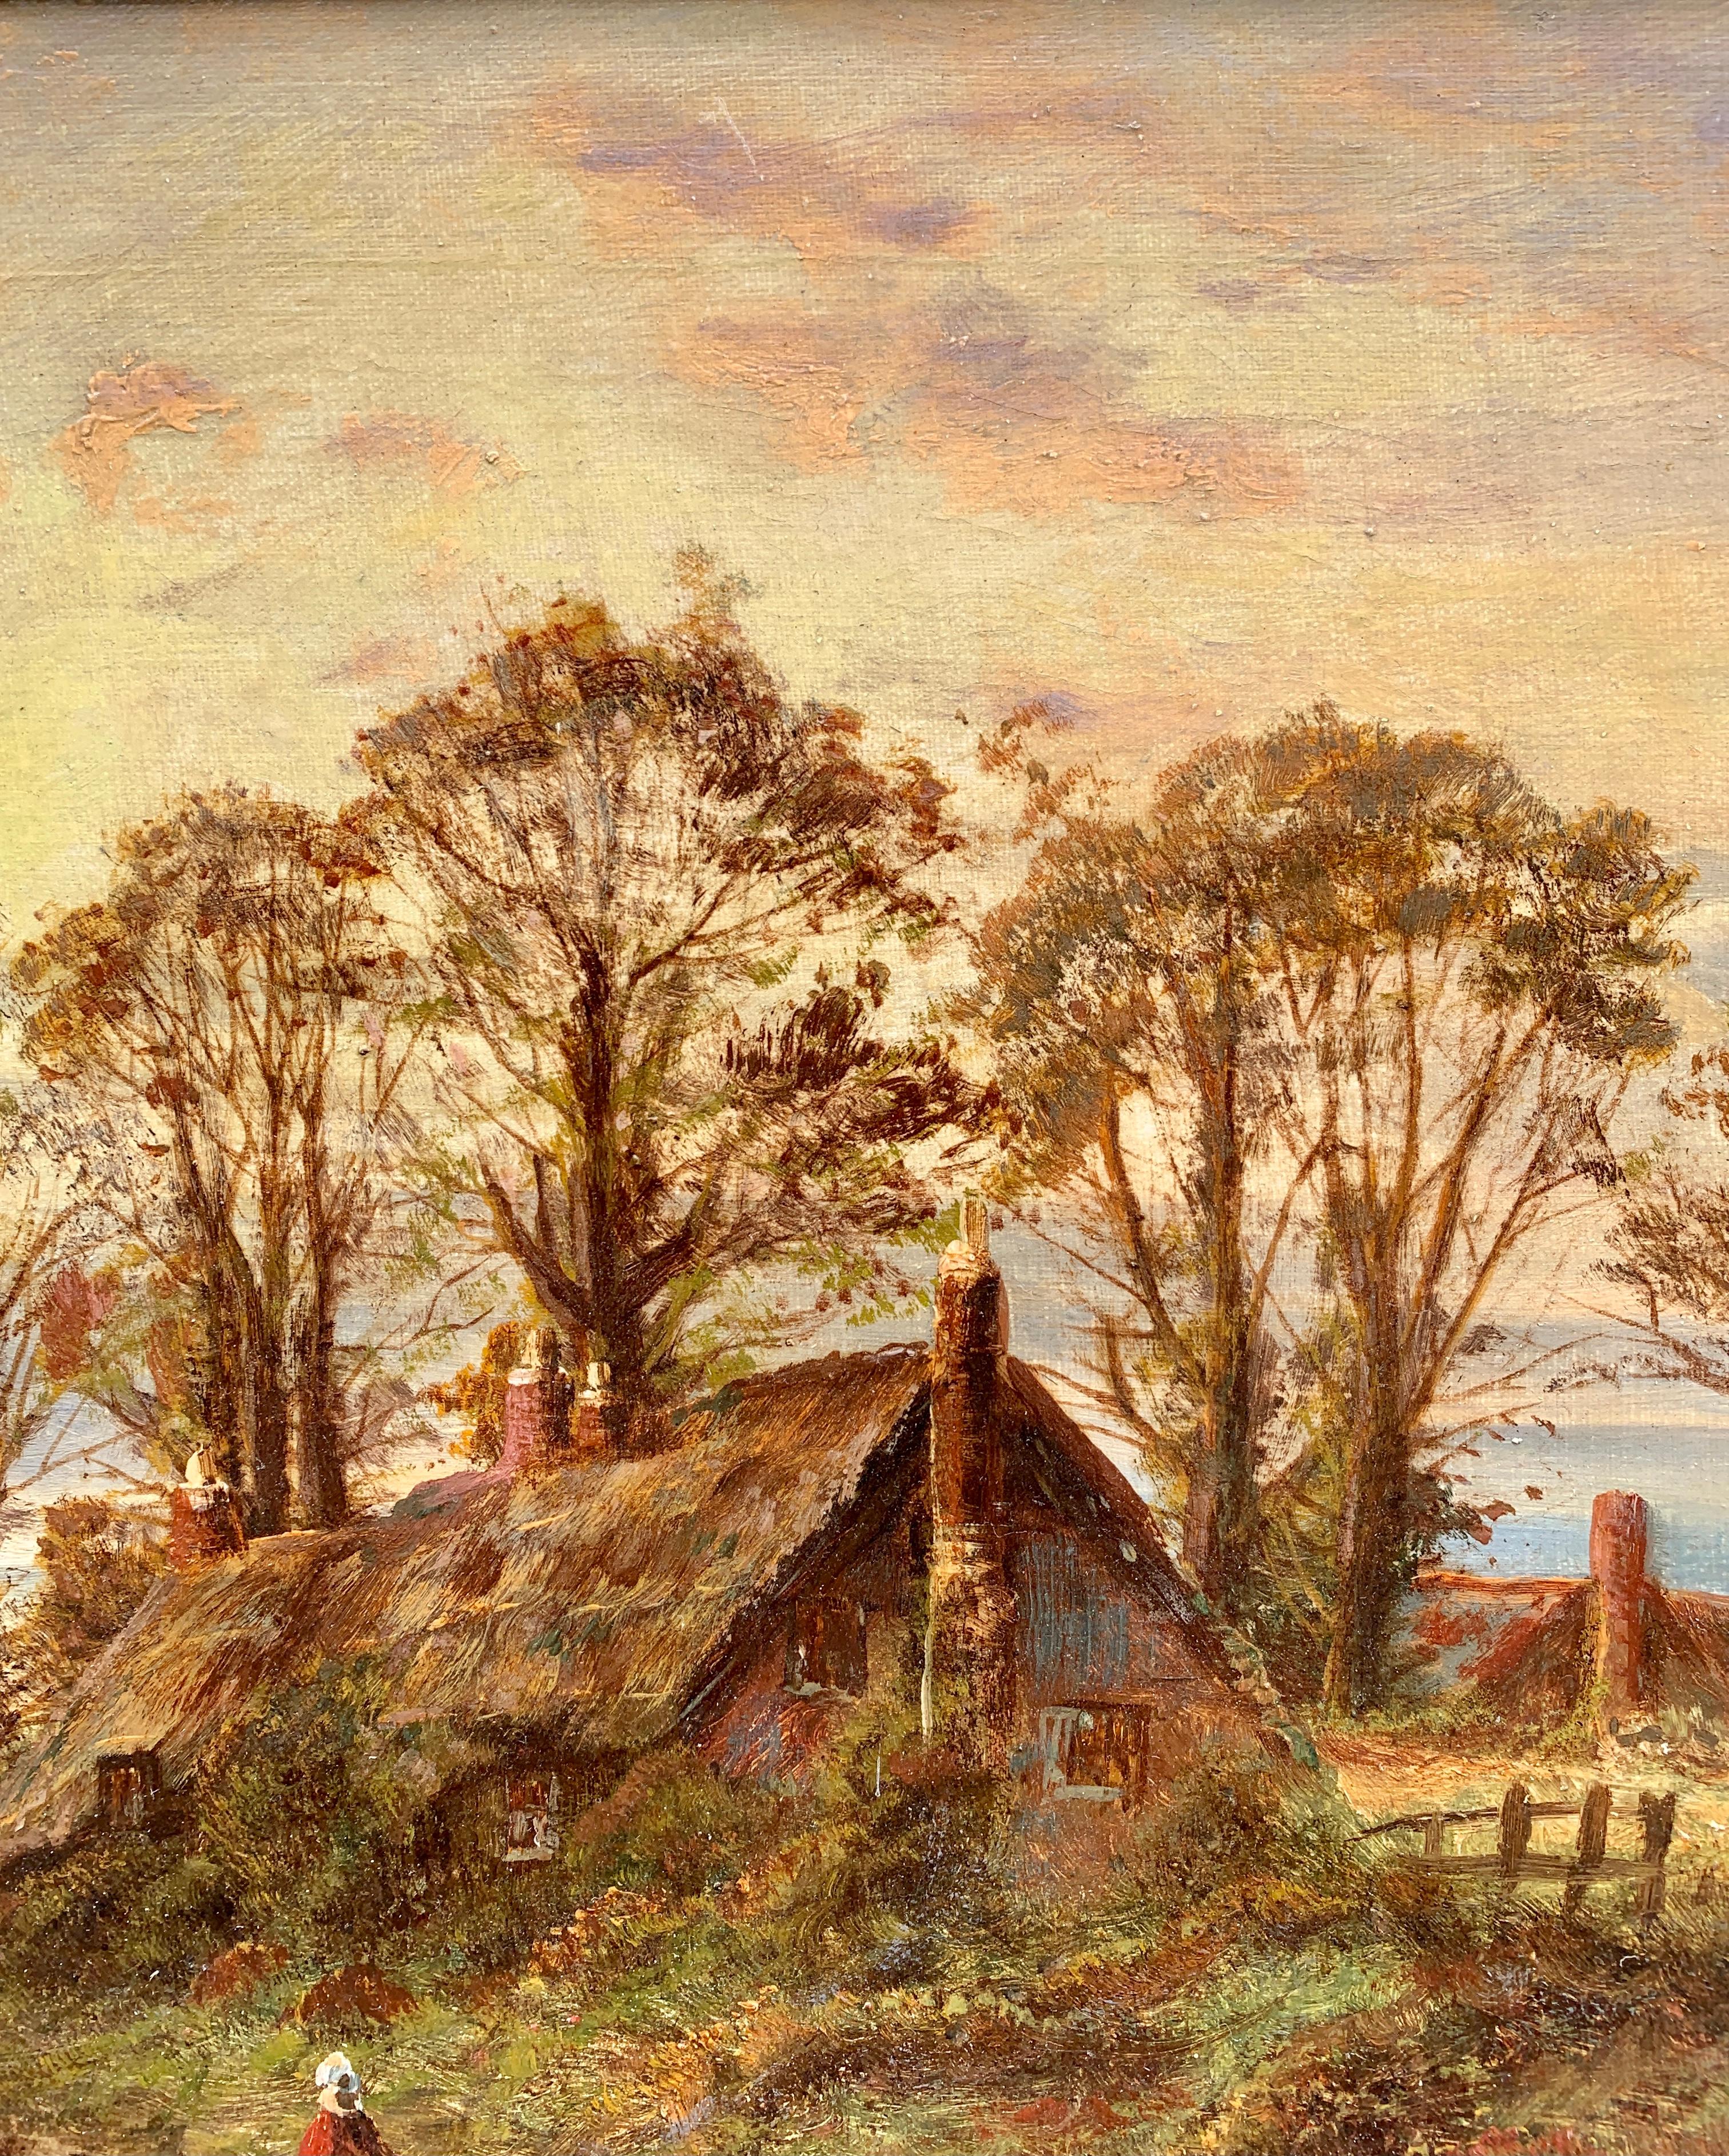 19th-century Victorian English landscape with a thatched cottage, and a figure at sunset

 A very fine and large example of O.T. Clark's work. Born in Hoxton, New Town (just north of London, England) December 21, 1850. His father was a painter as